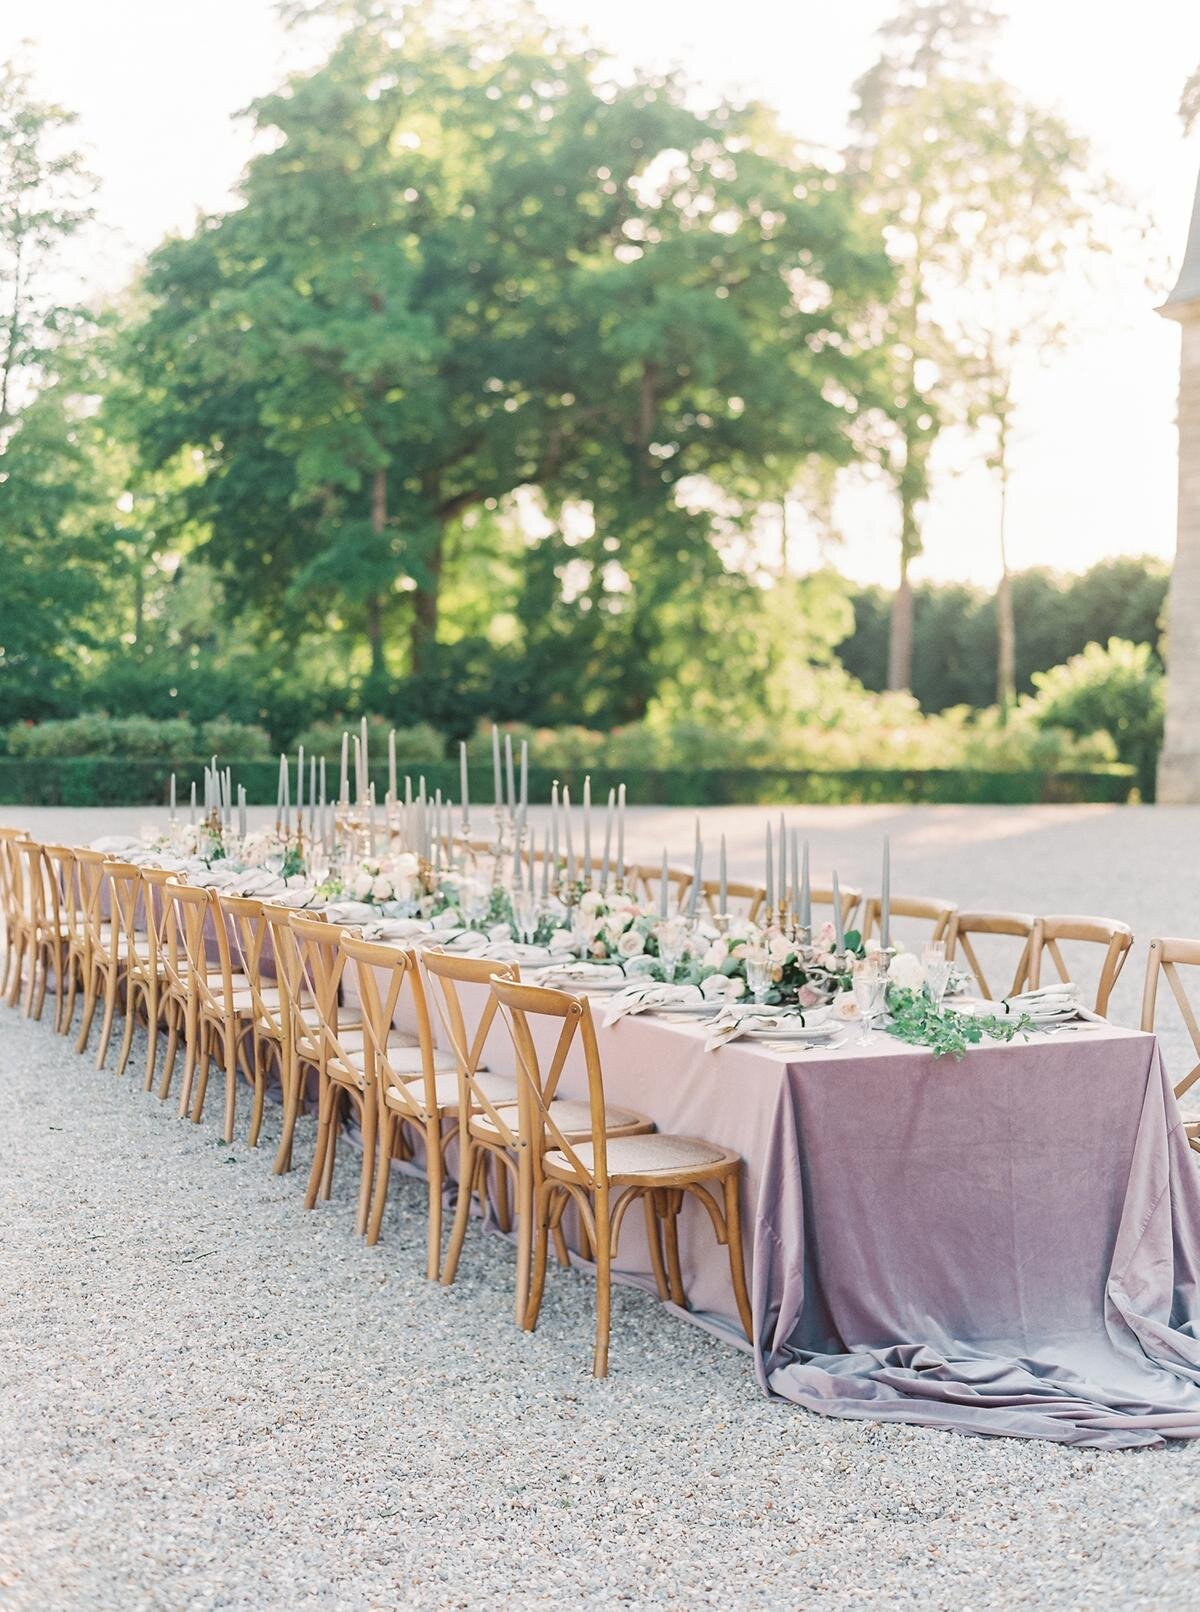 A long dining table set up in the courtyard for a french chateau wedding reception at Chateau de Courtomer.